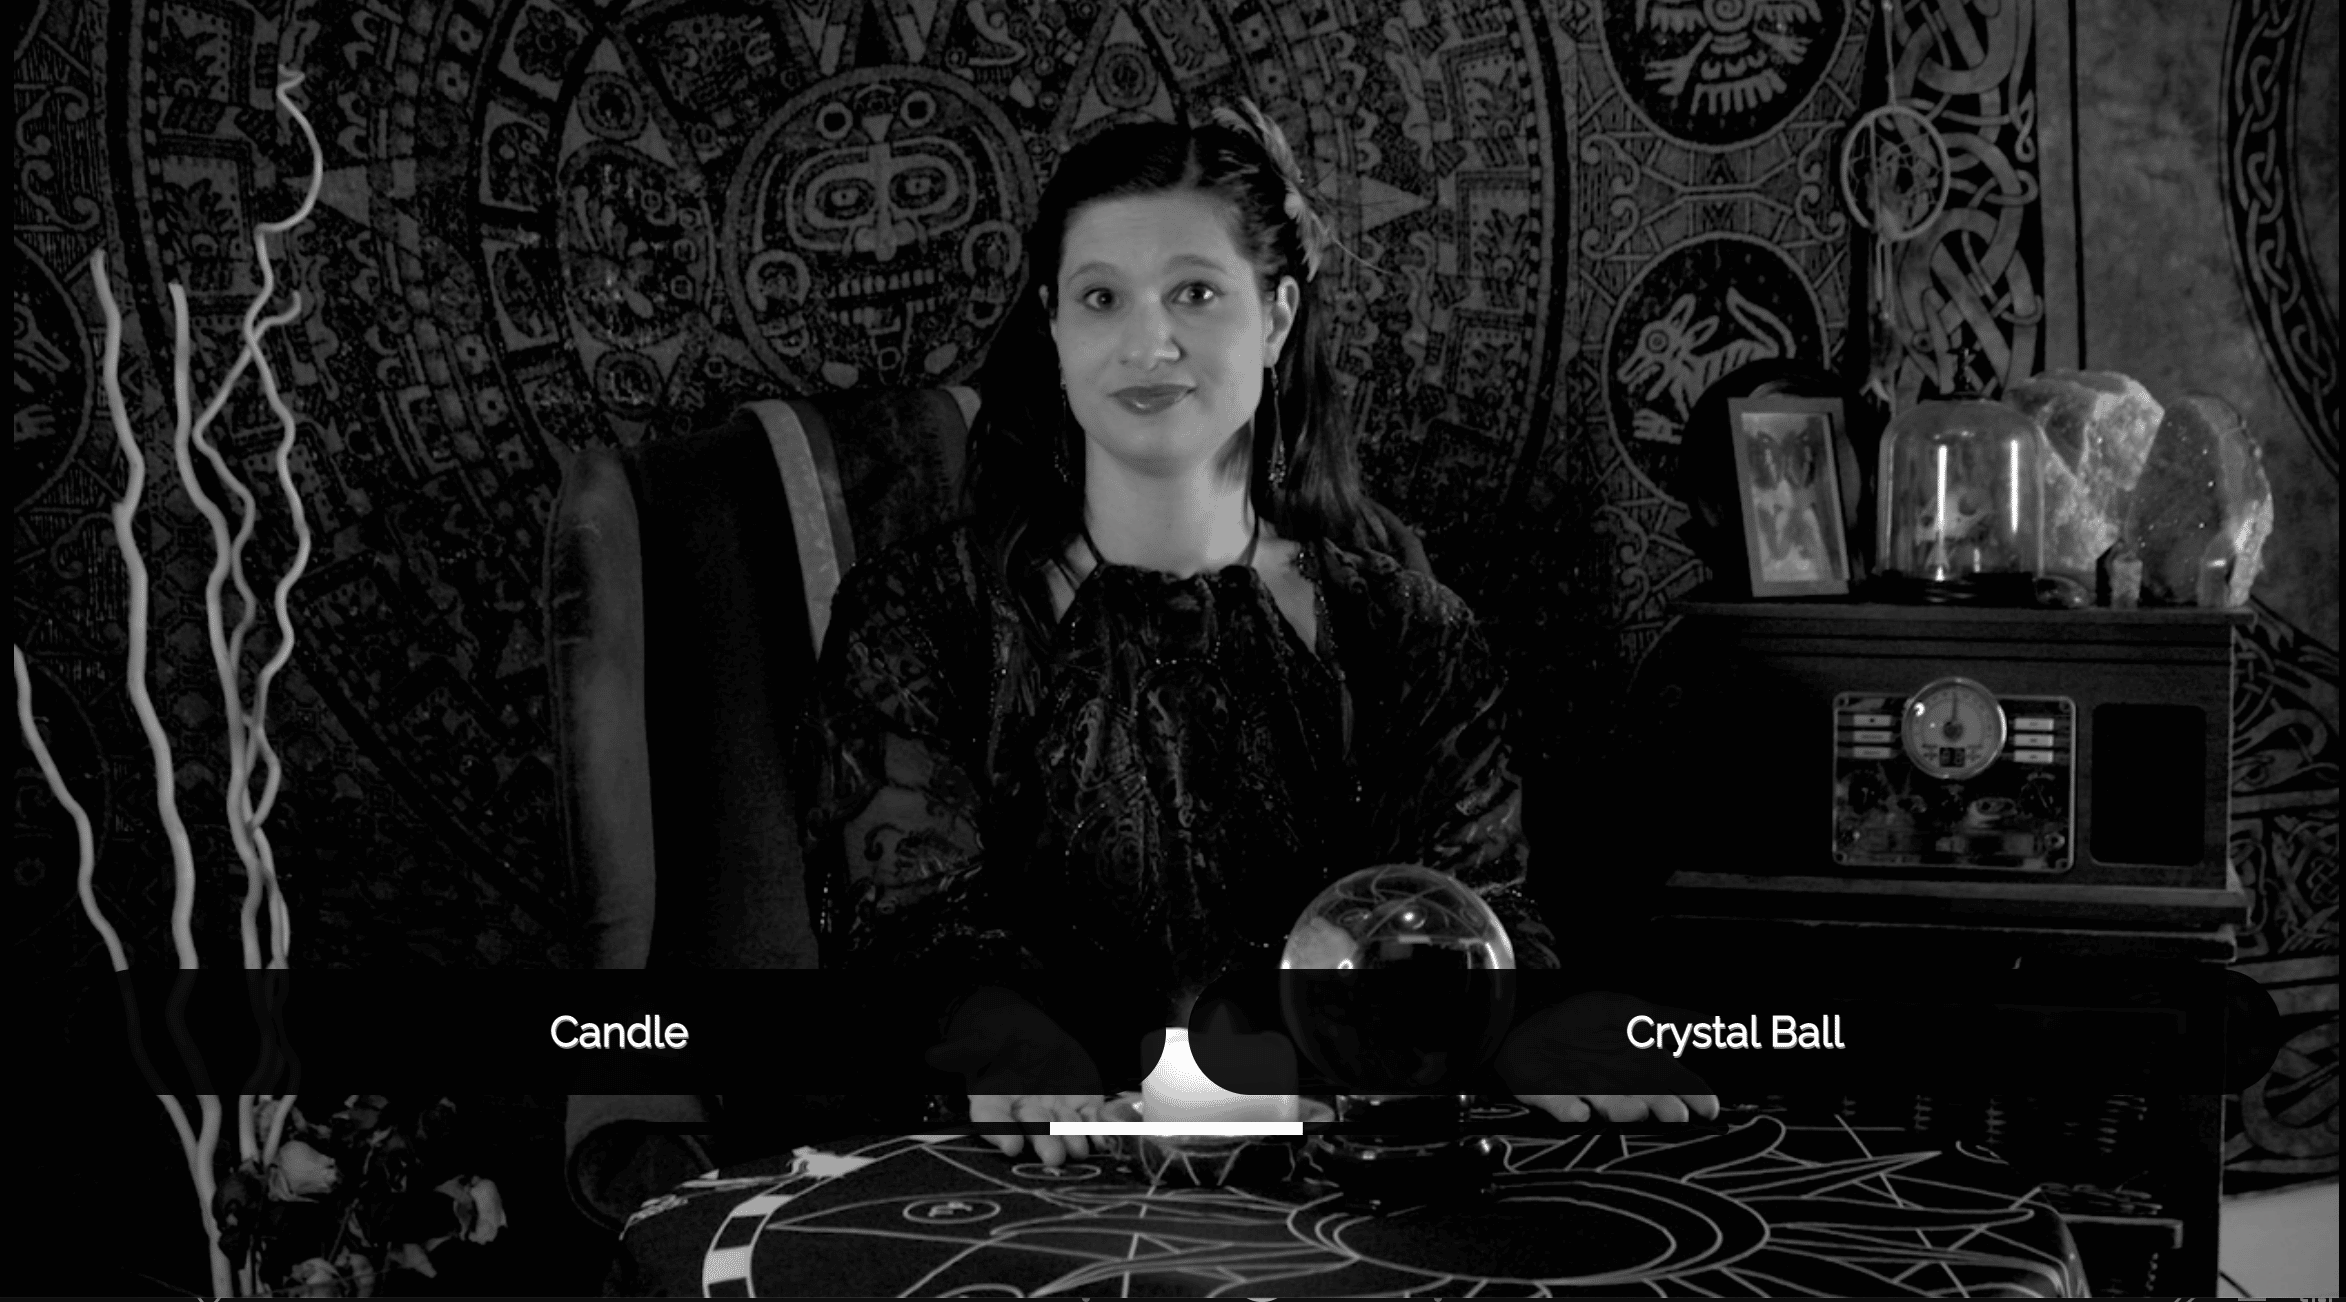 nteractive Seance - Live Action project from Austin Community College Students - black and white scene showing a woman sitting at a table with a crystal ball on the top. The choices read "candle" or "crystal ball".